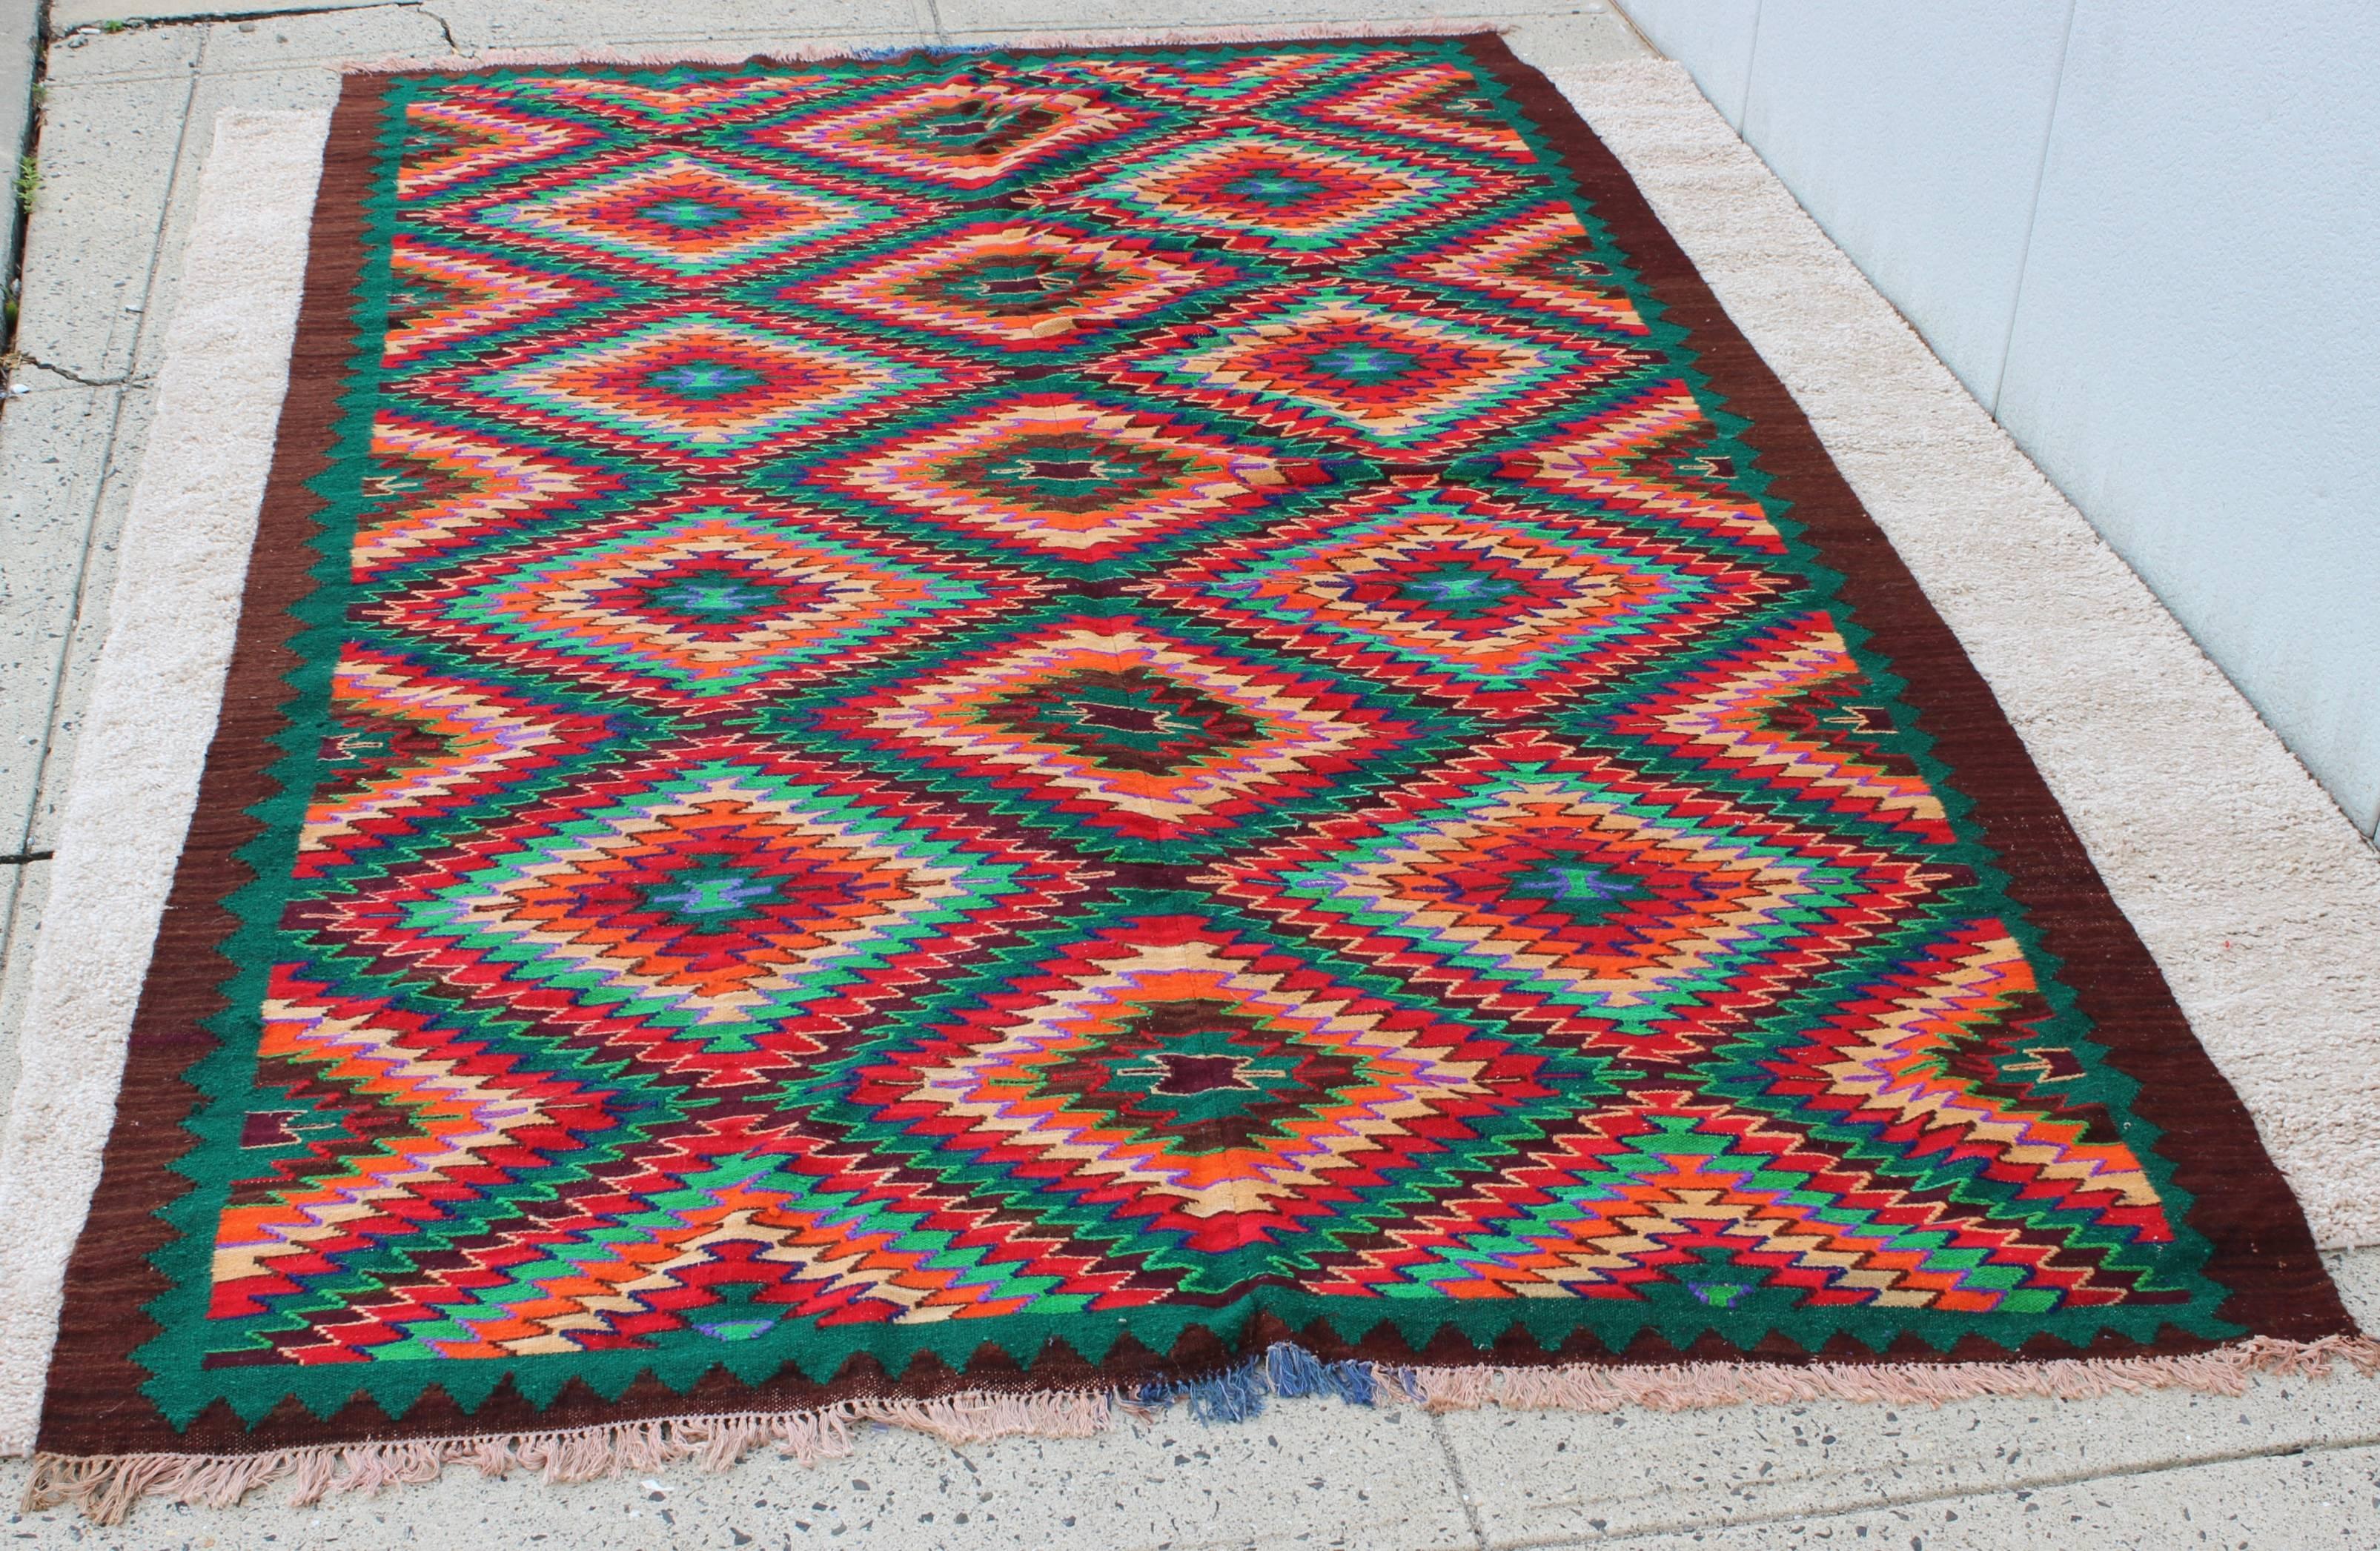 Stunning 1940s handwoven wool Navajo rug, with amazing detail and colors.